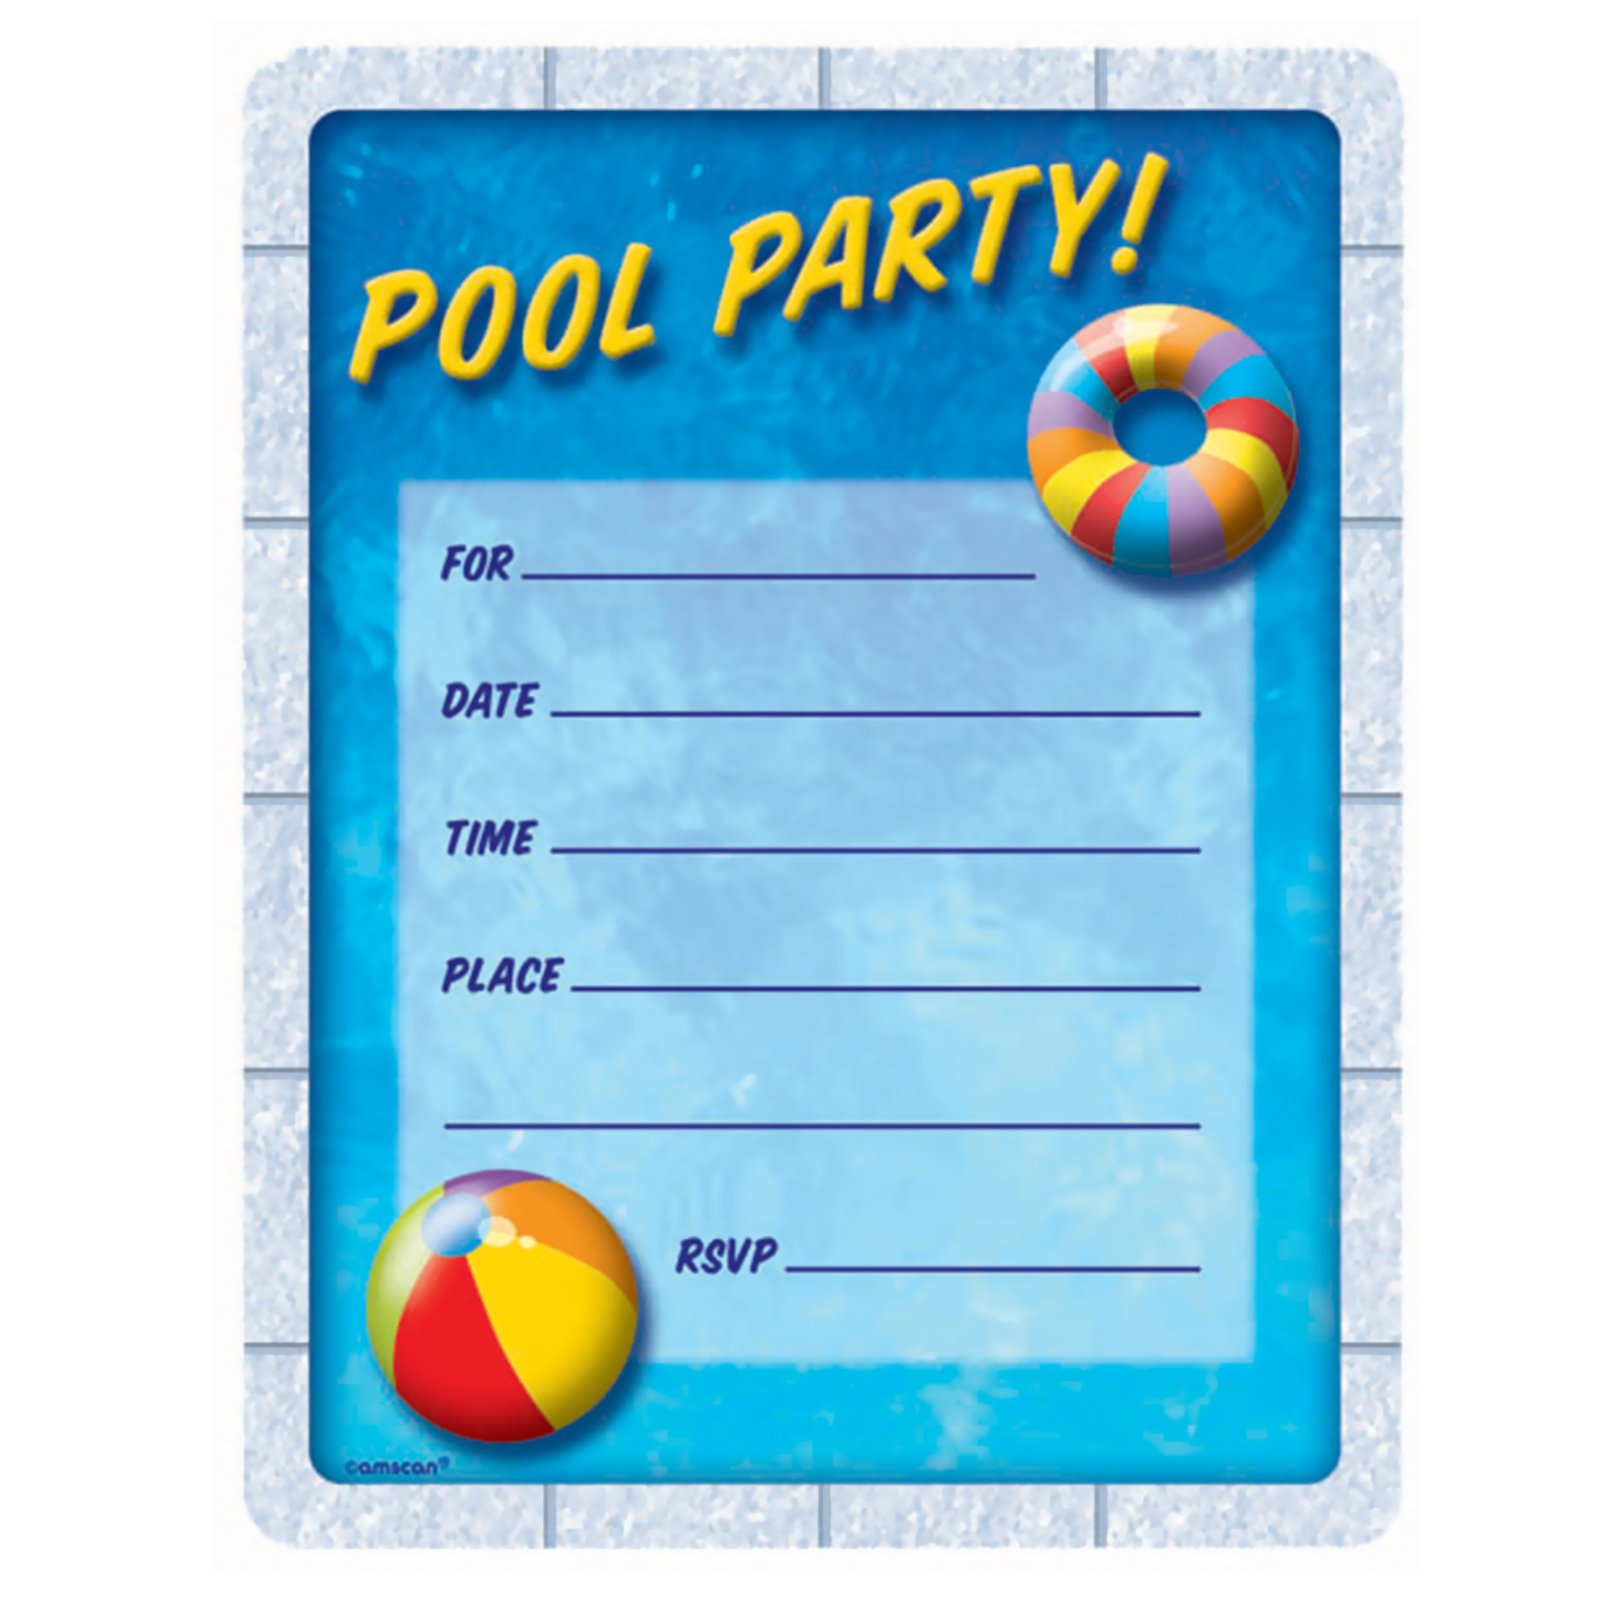 Pool Party - Invitations (50 count) - Click Image to Close